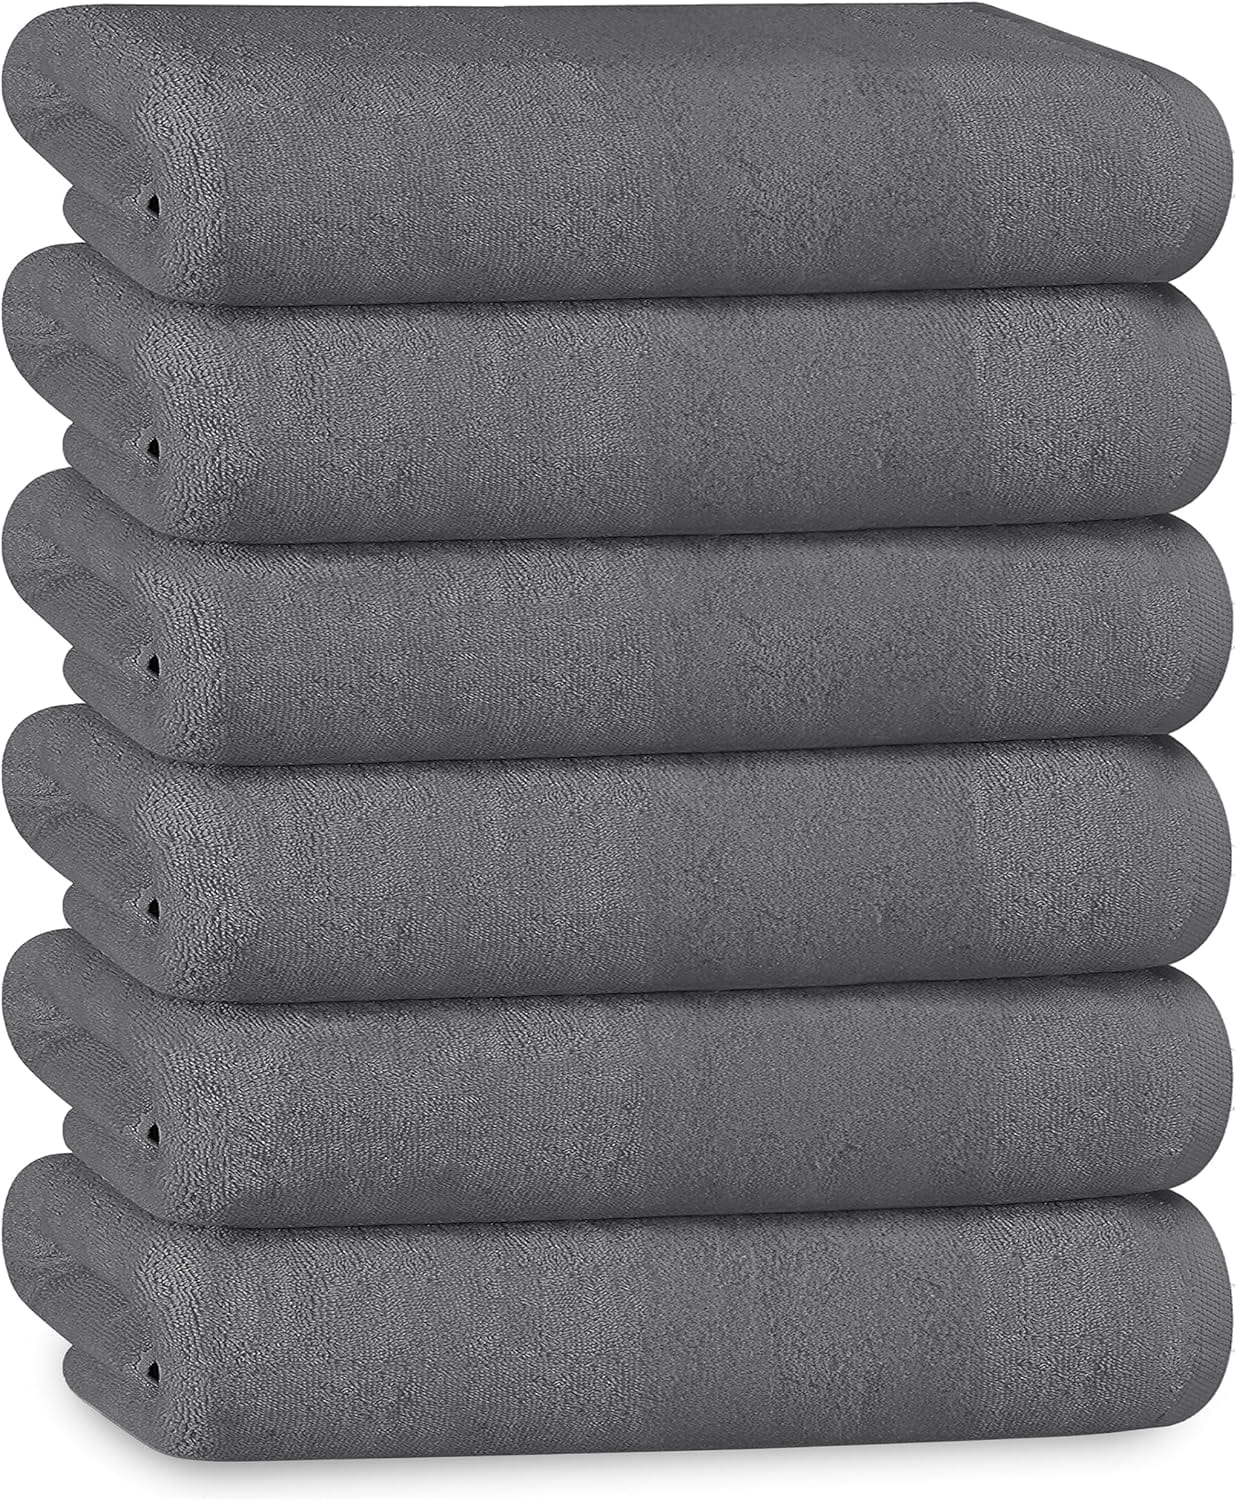 Hotel Collection Towels White Grey Hospitality Commercial Towels 6 PK HAND TOWELS / GREY OLIVIA ROCCO Towel